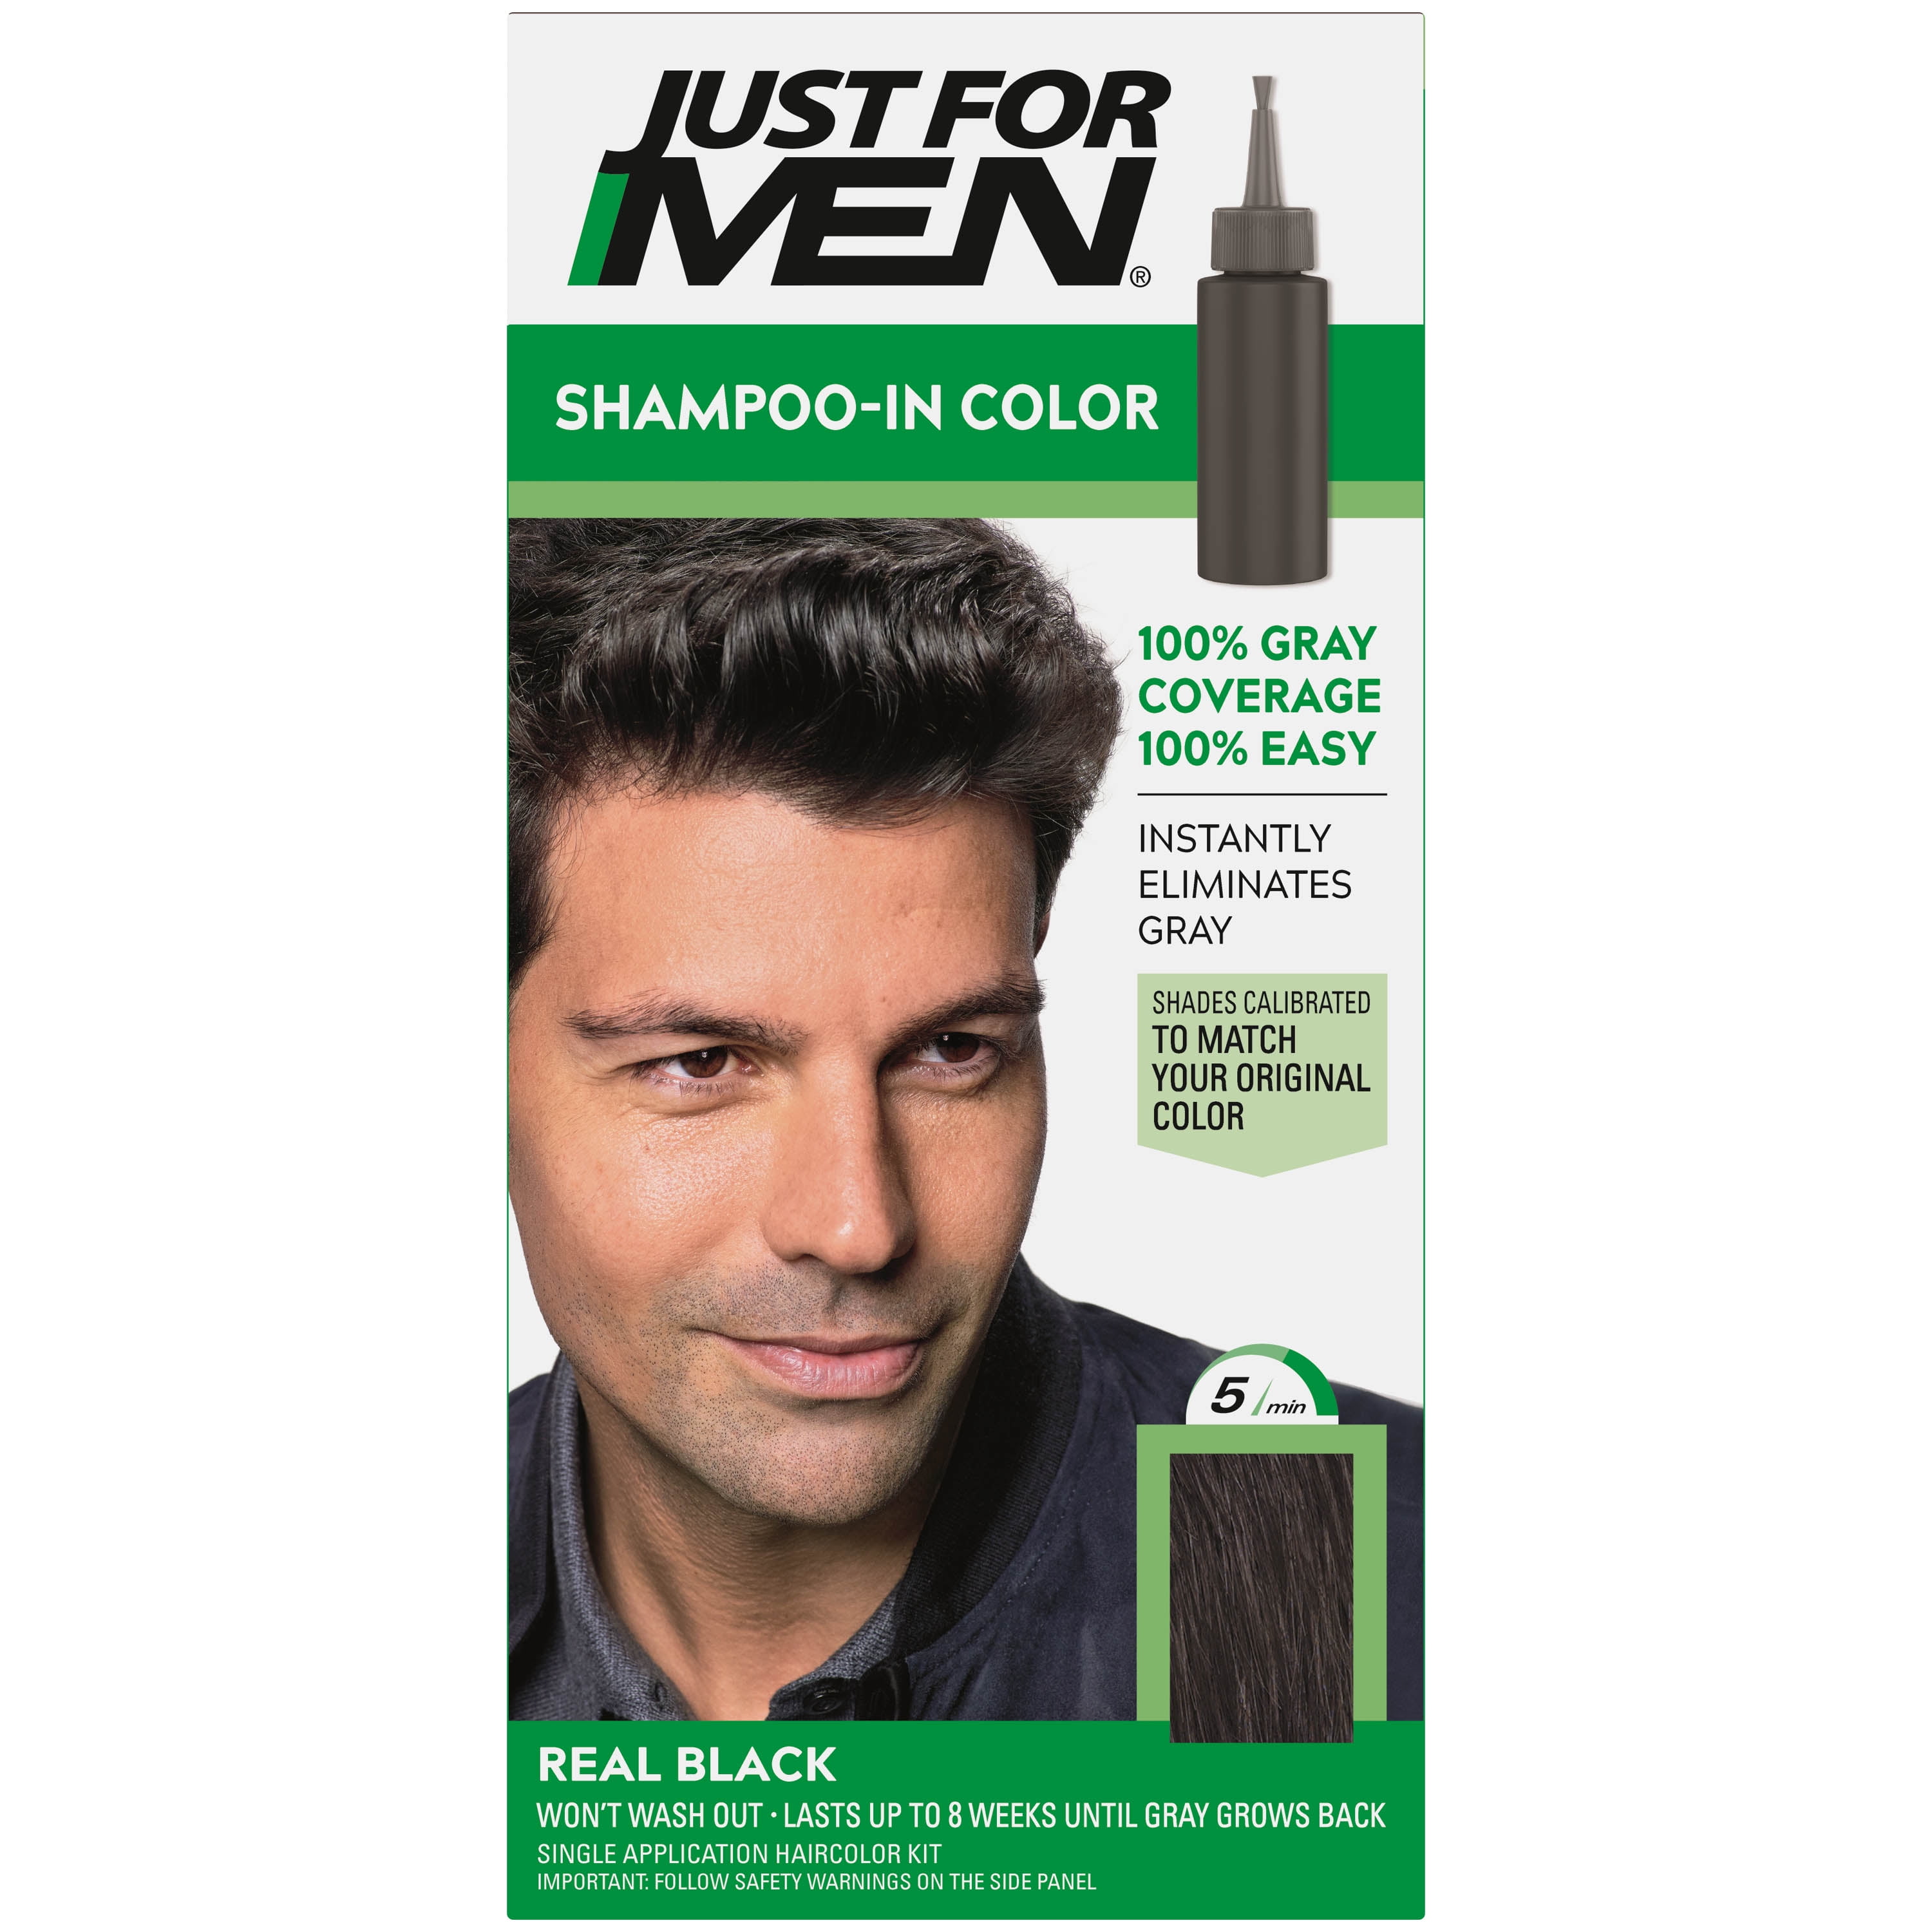 Just For Men Shampoo-in Gray Hair Color, H-35 Medium Brown